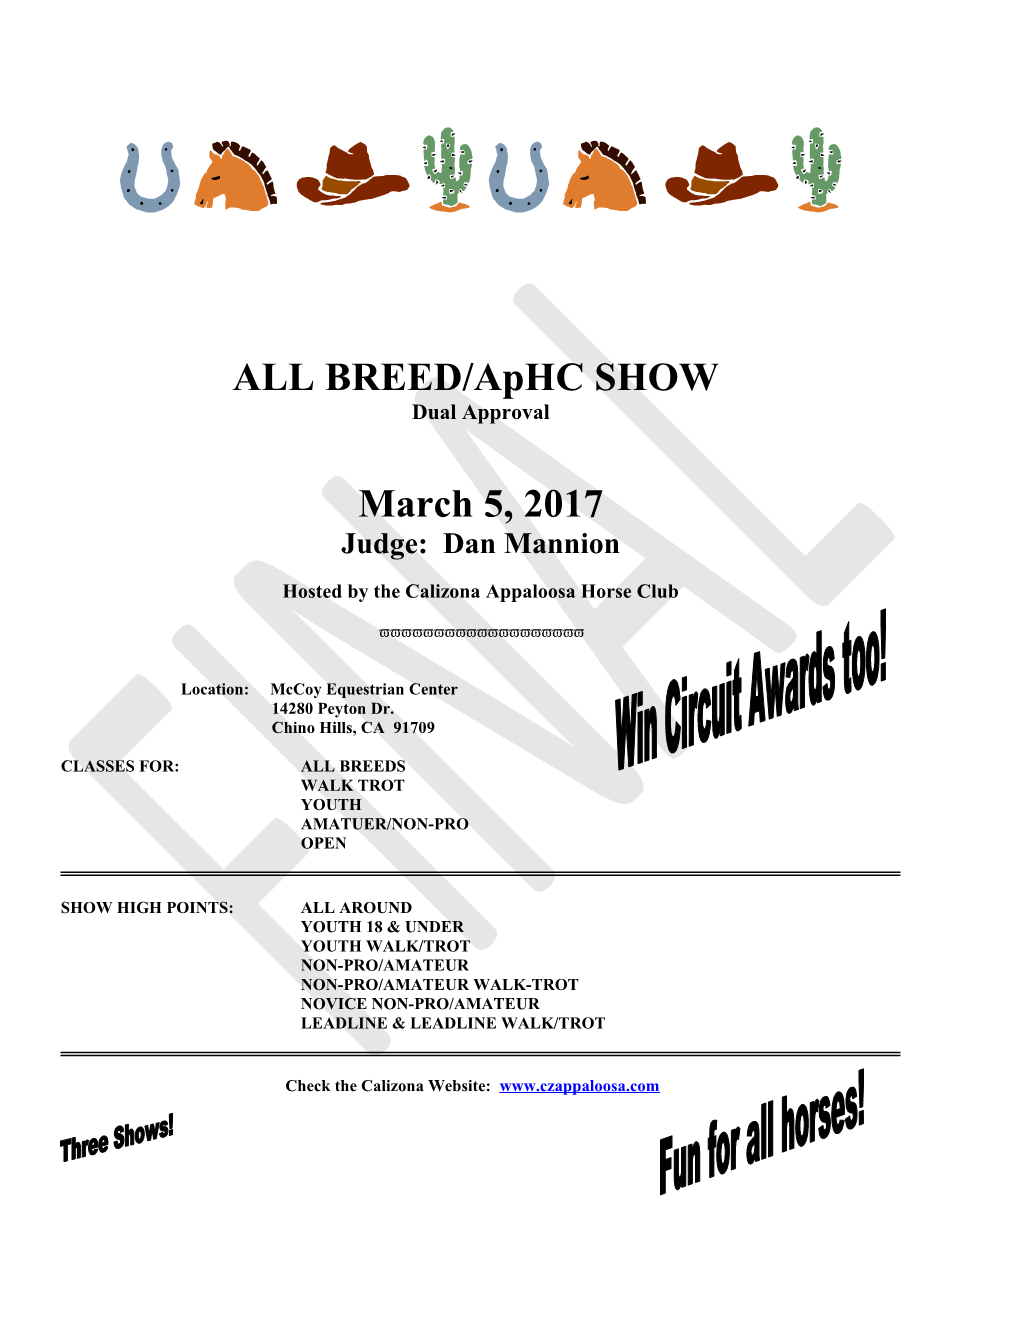 ALL BREED/Aphc SHOW